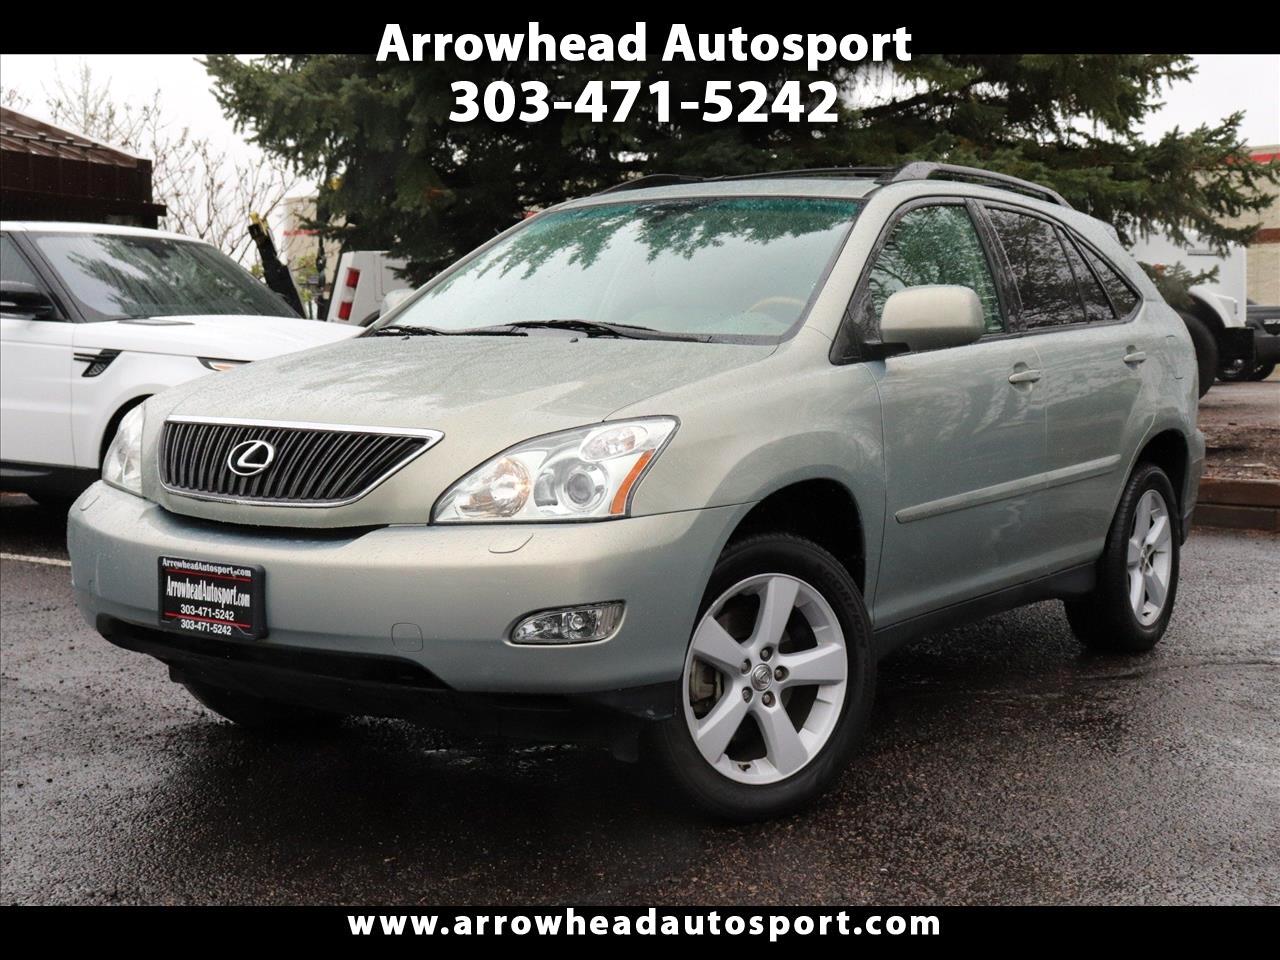 Used 2007 Lexus RX 350 AWD 4dr for Sale in Parker CO 80134 Arrowhead ...